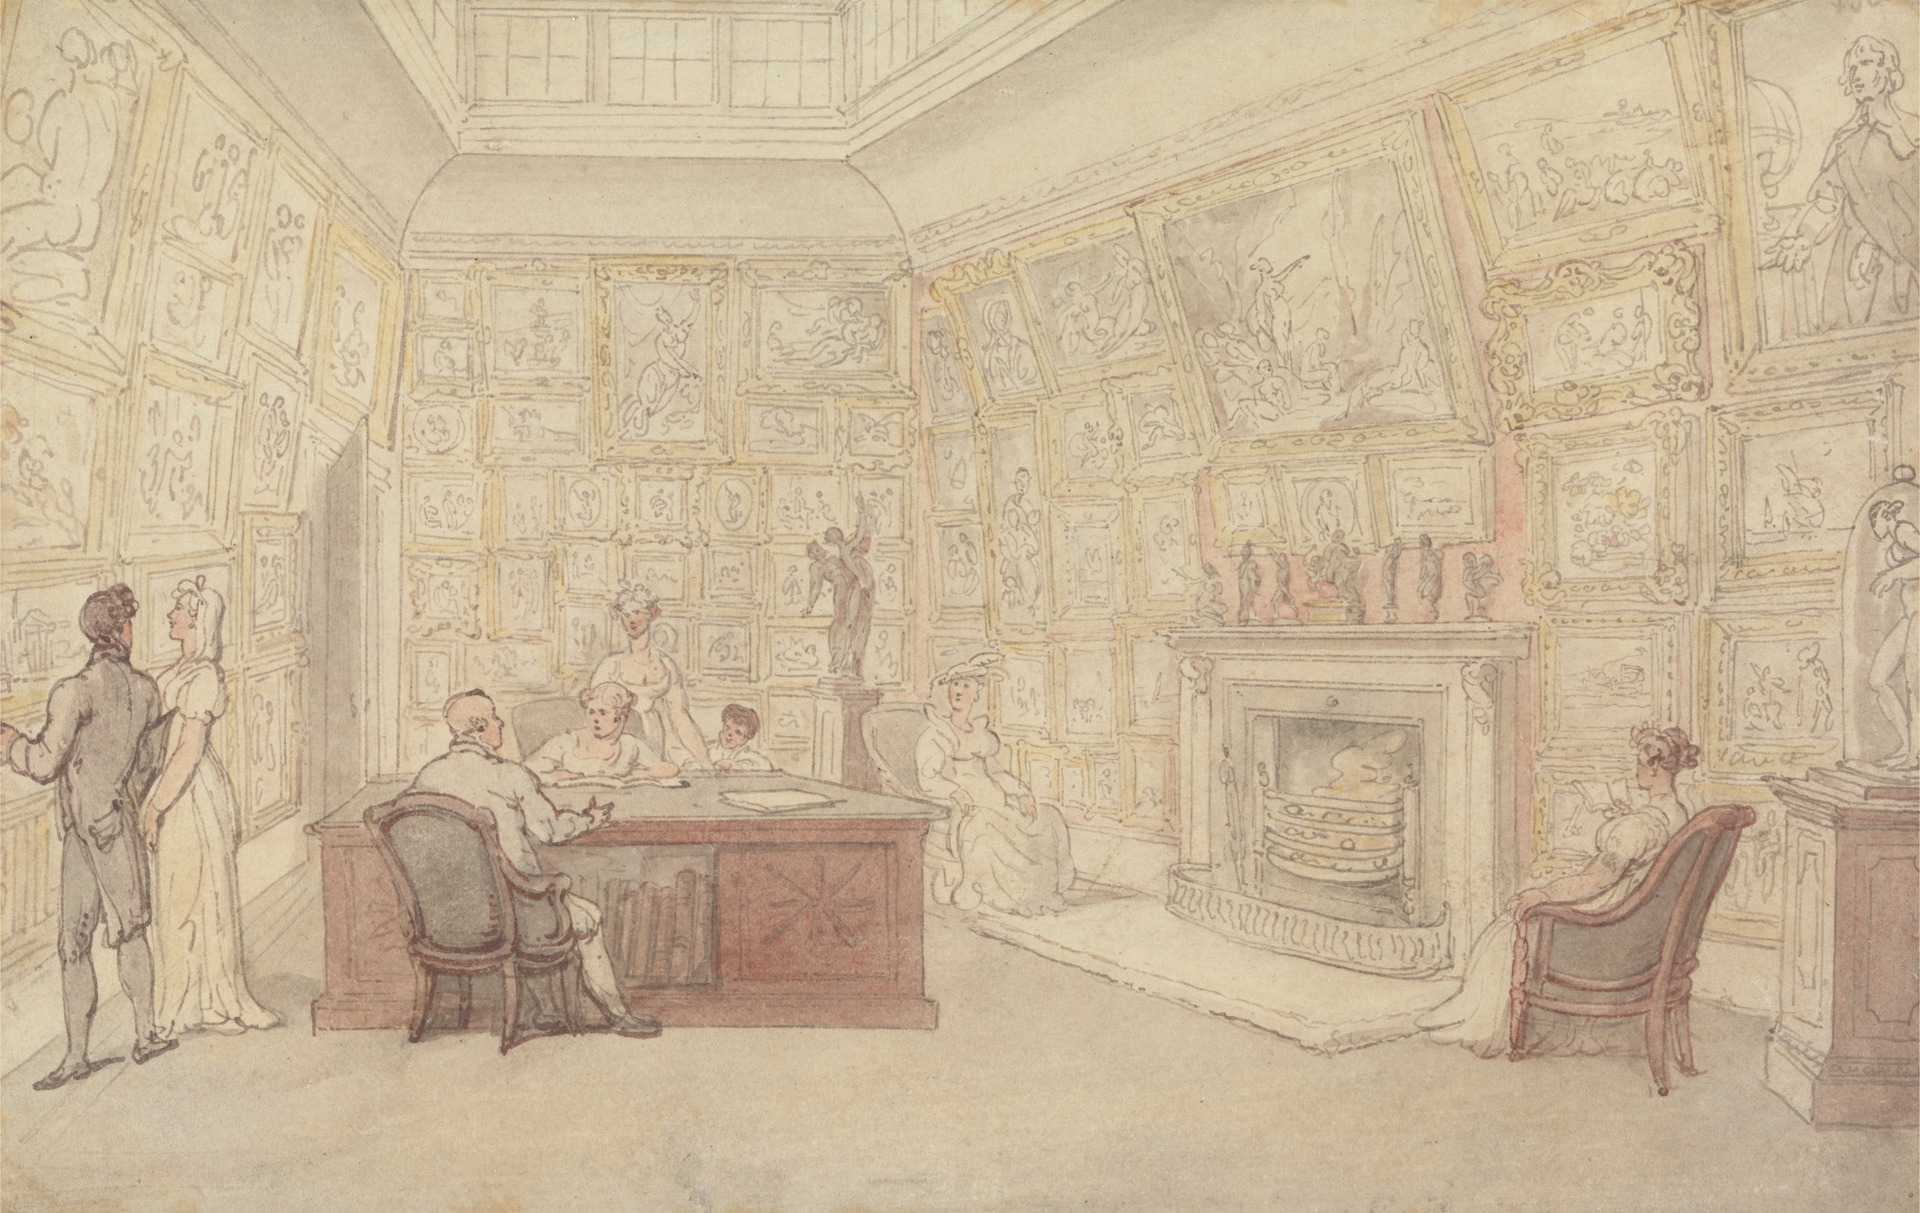 Thomas Rowlandson, A Gentleman’s Gallery, undated, Watercolor and graphite with pen and gray ink and pen and brown ink on medium, slightly textured, cream wove paper, Yale Center for British Art, Paul Mellon Collection.